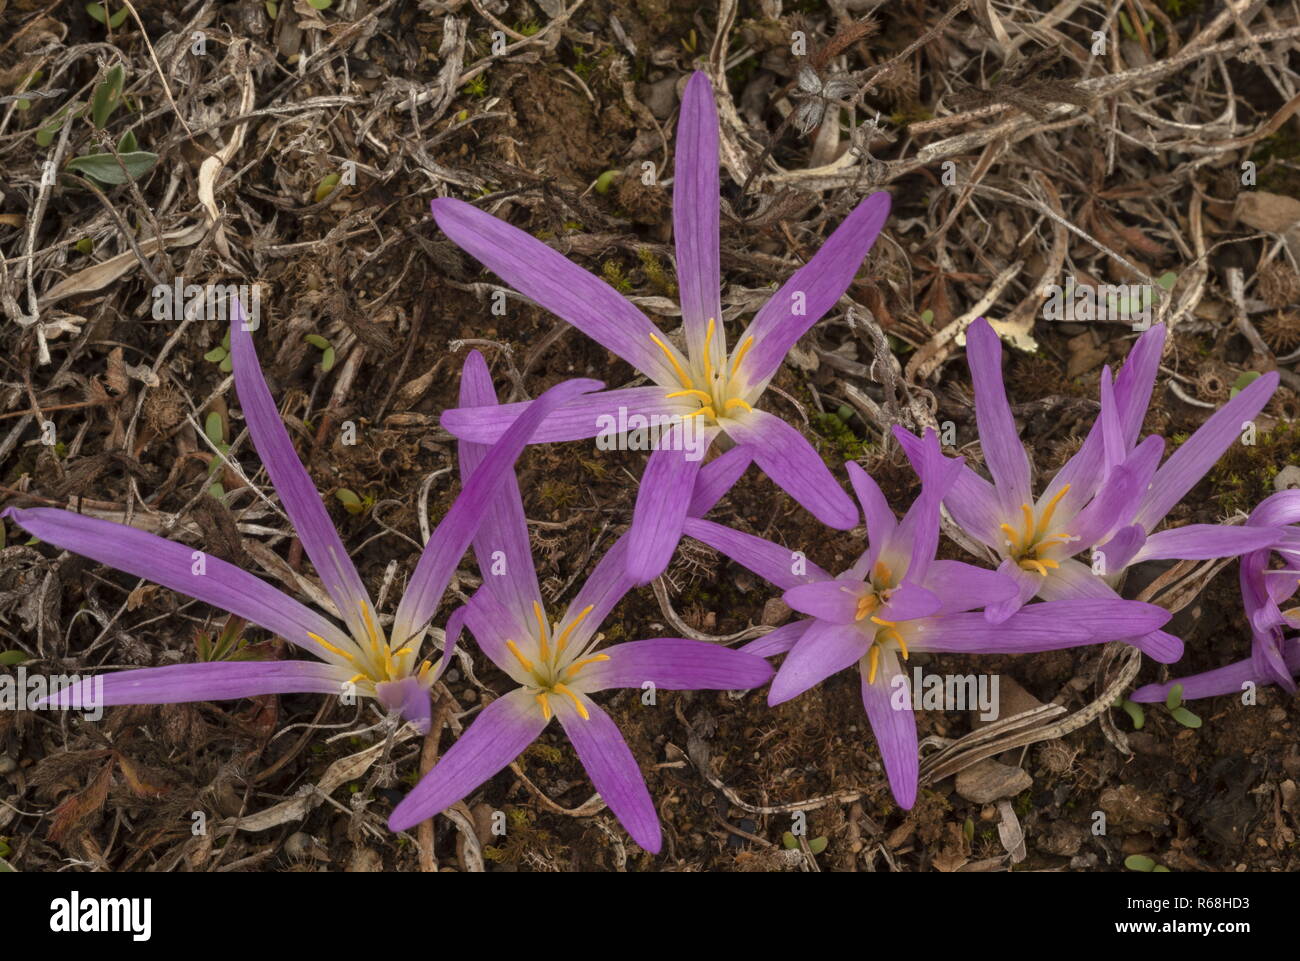 Pyrenean Merendera, Colchicum montanum, in flower in autumn in the Spanish Pyrenees. Stock Photo